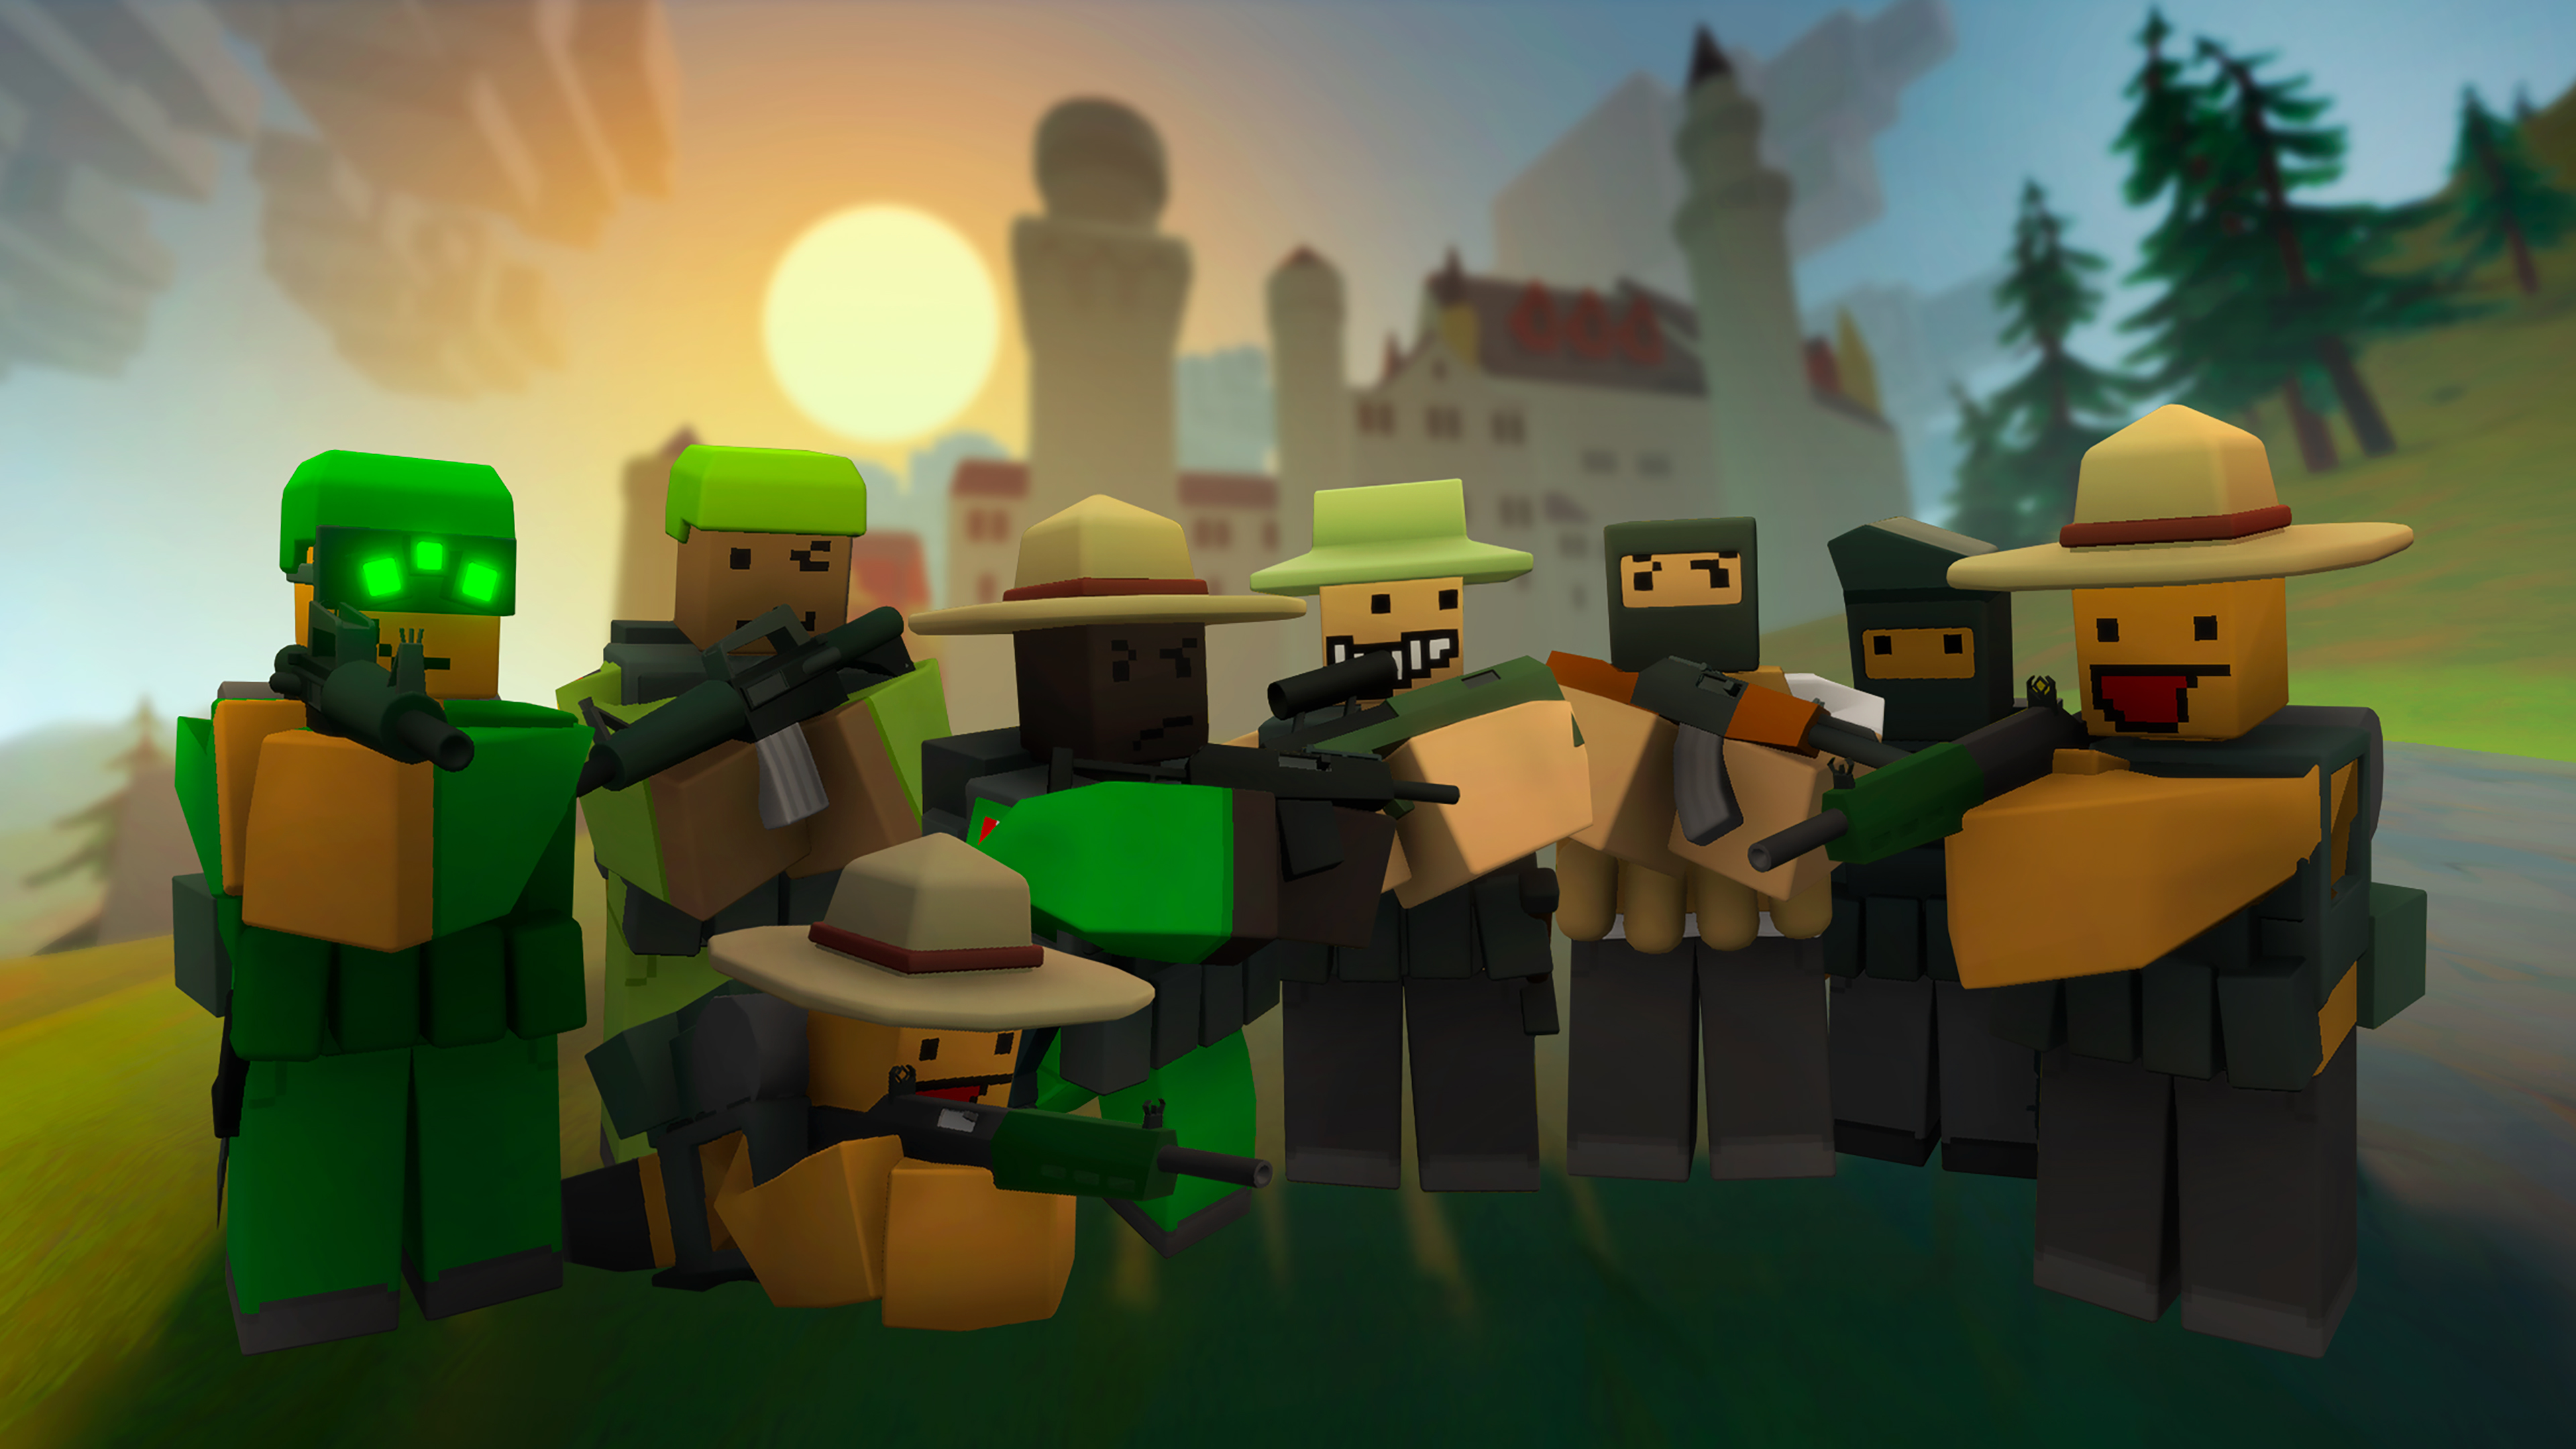 download unturned ps5 for free